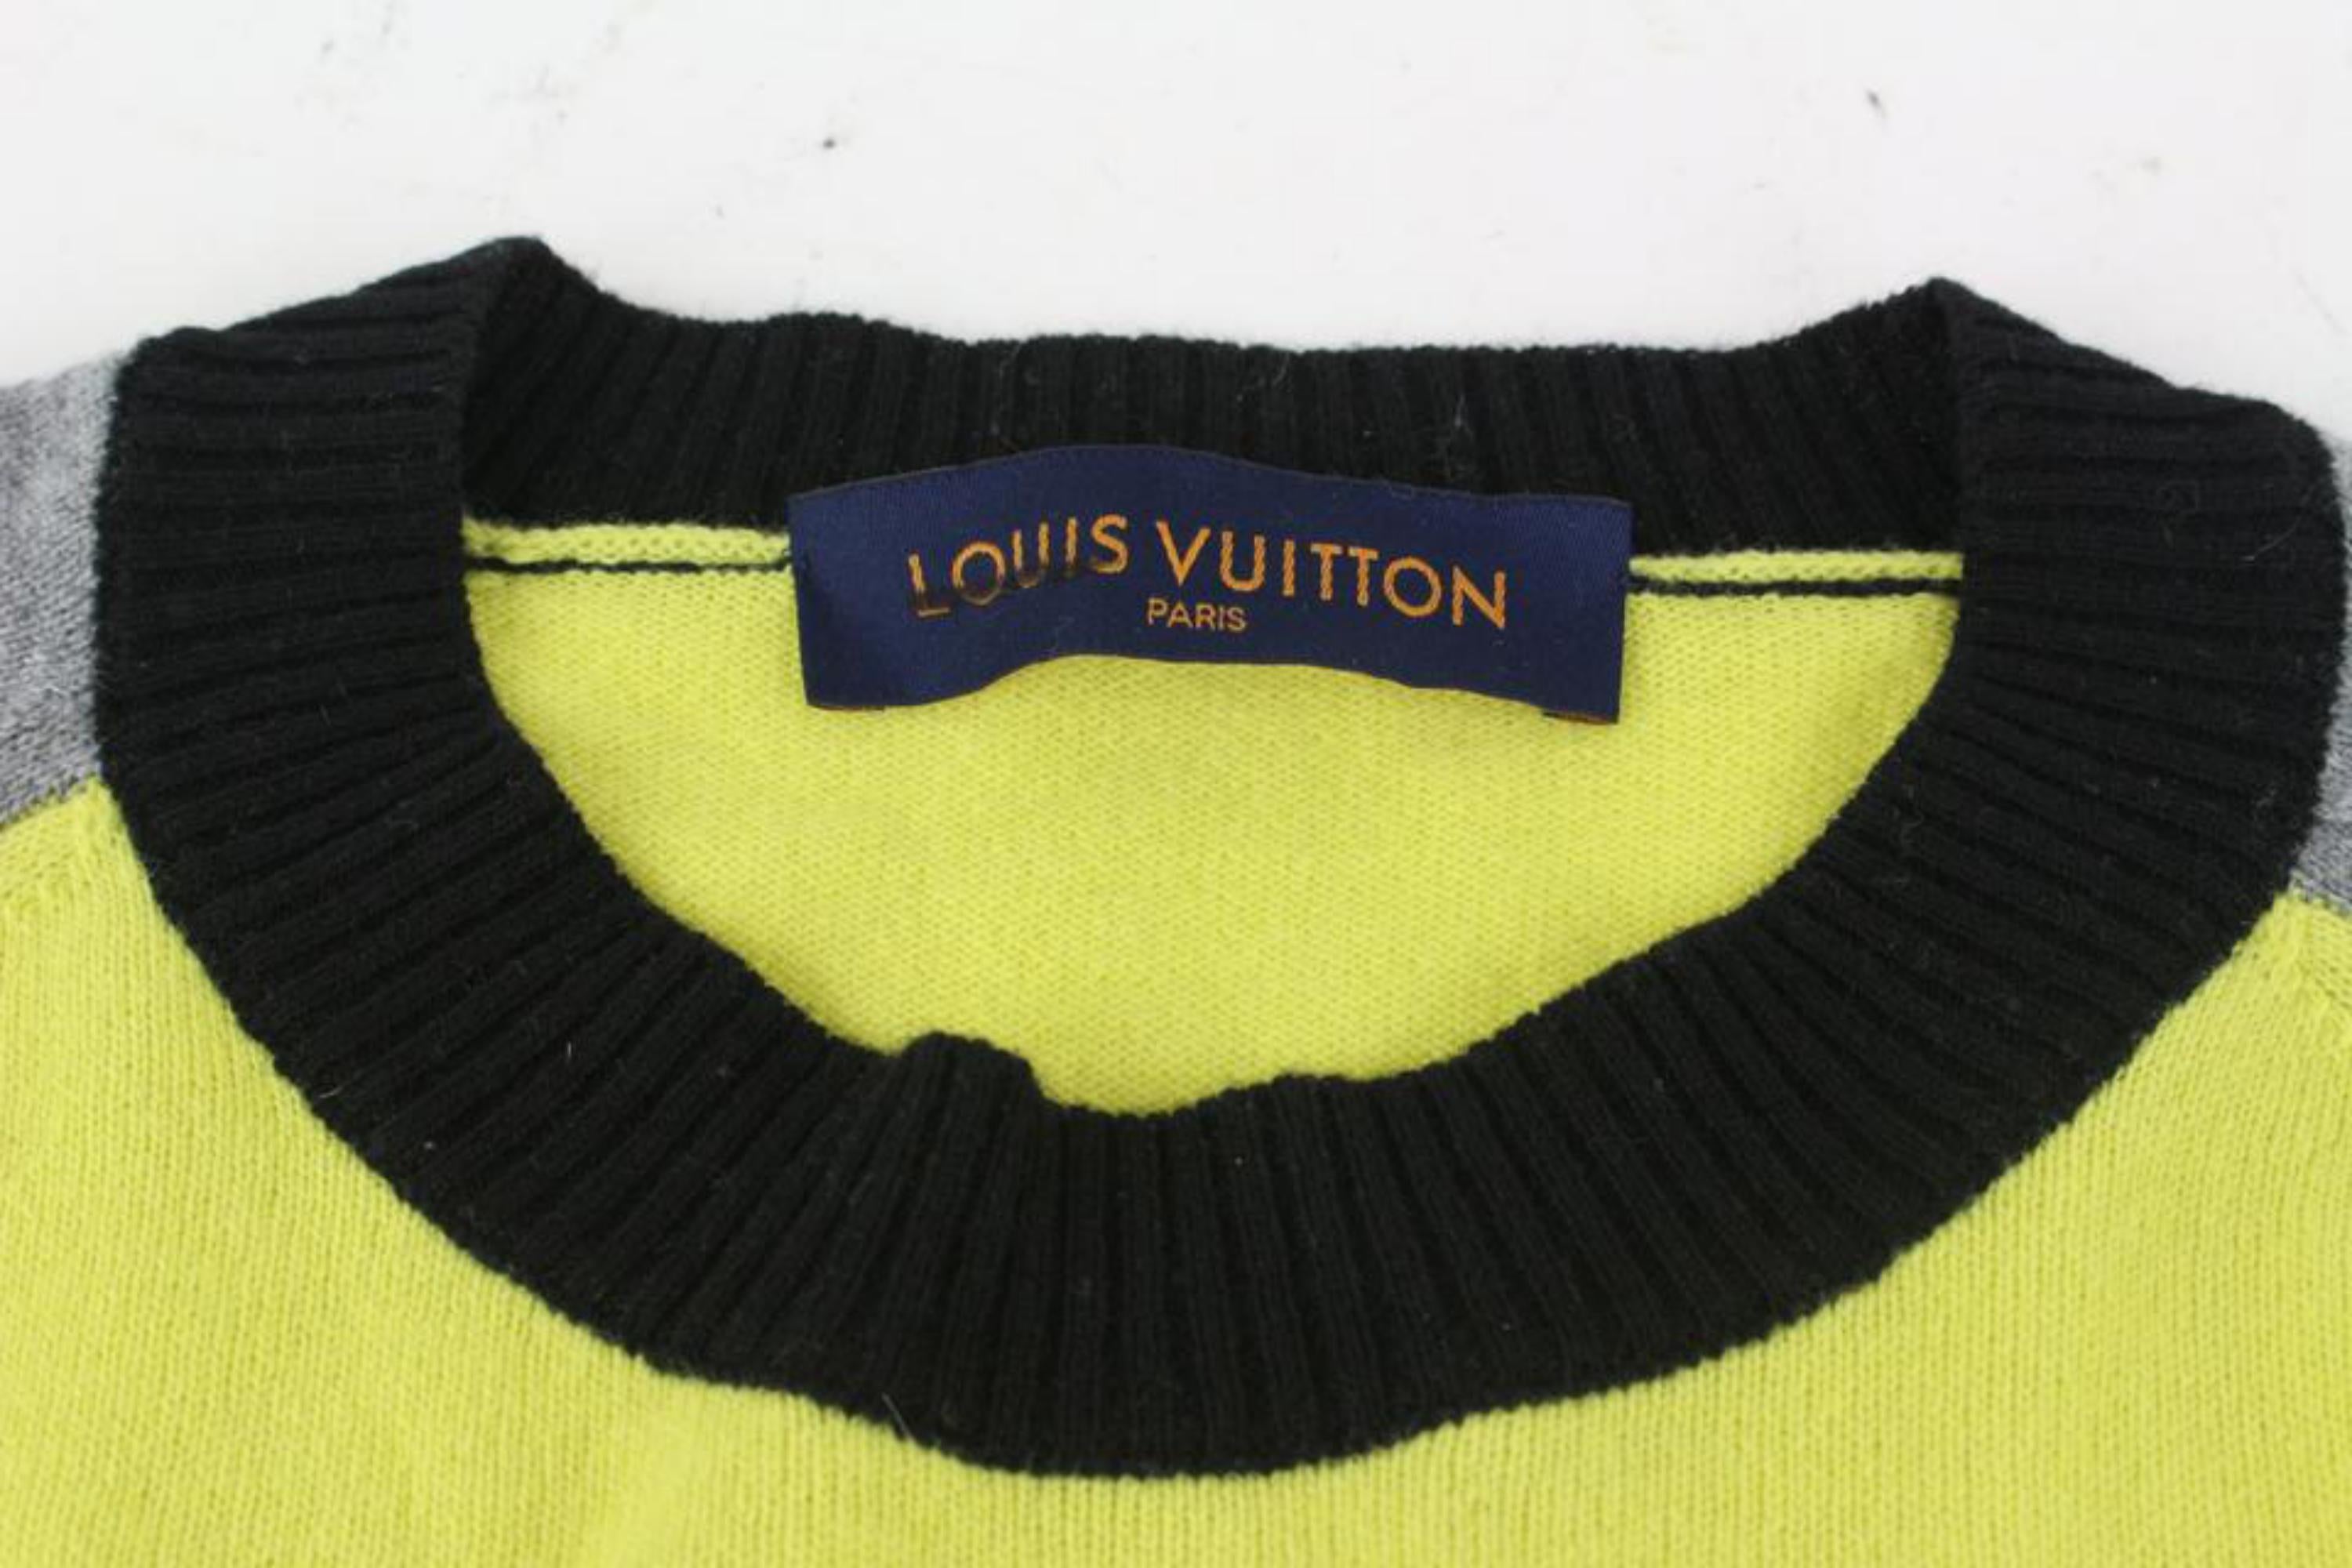 Louis Vuitton Men's Large Grey x Yellow Colour Block Crew Neck Sweater  928lv67 In Good Condition For Sale In Dix hills, NY